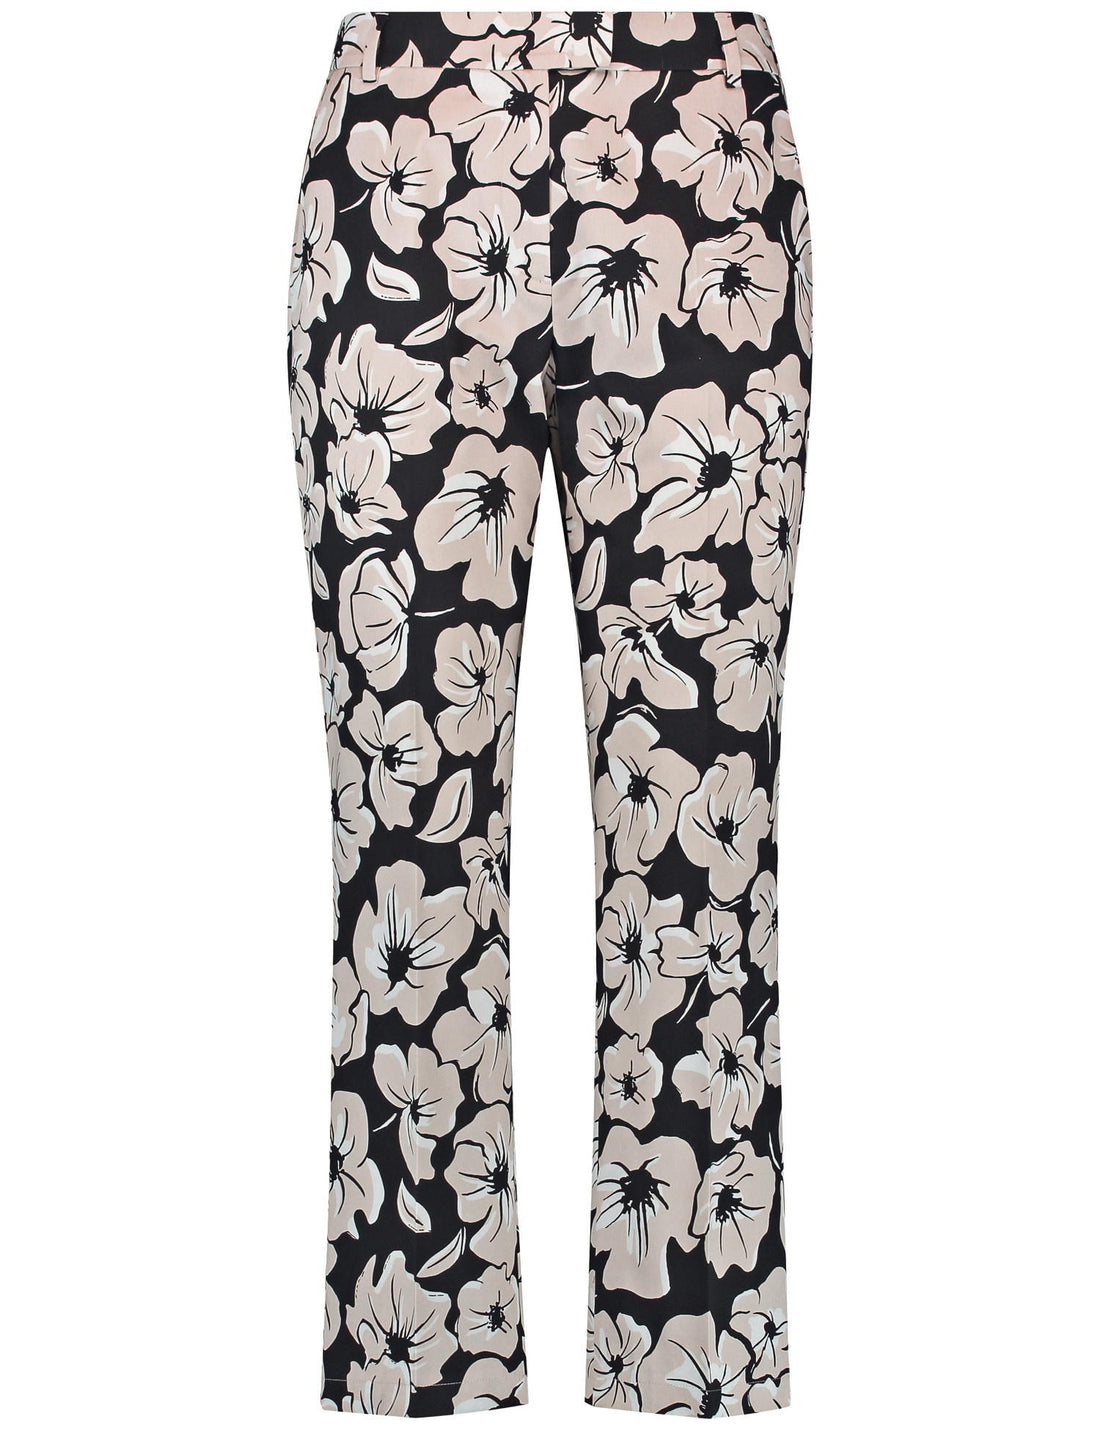 Chinos With A Floral Pattern_320038-31293_1098_02